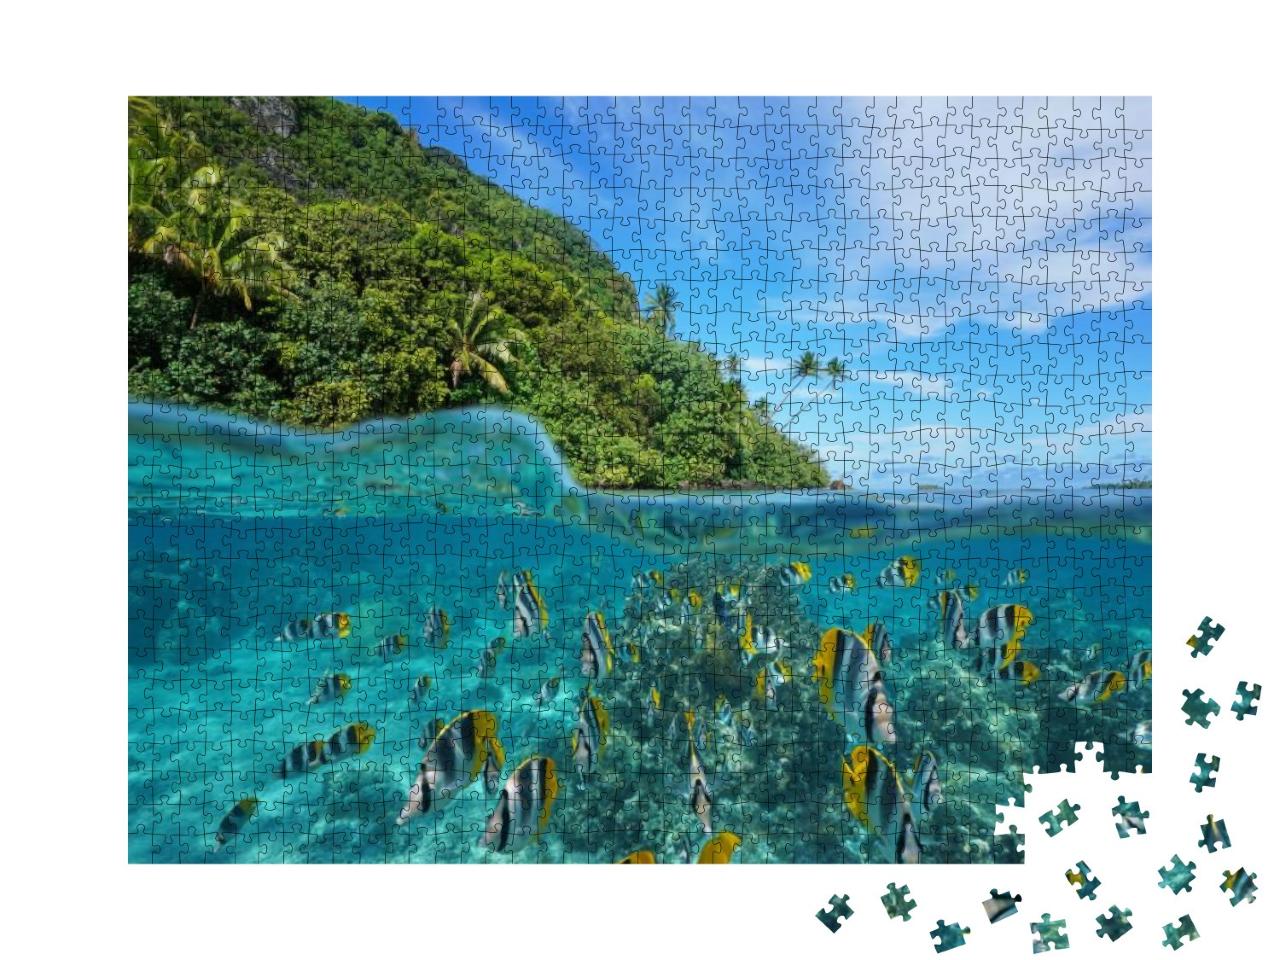 Over & Under the Sea Near the Shore of a Lush Wild Coast... Jigsaw Puzzle with 1000 pieces